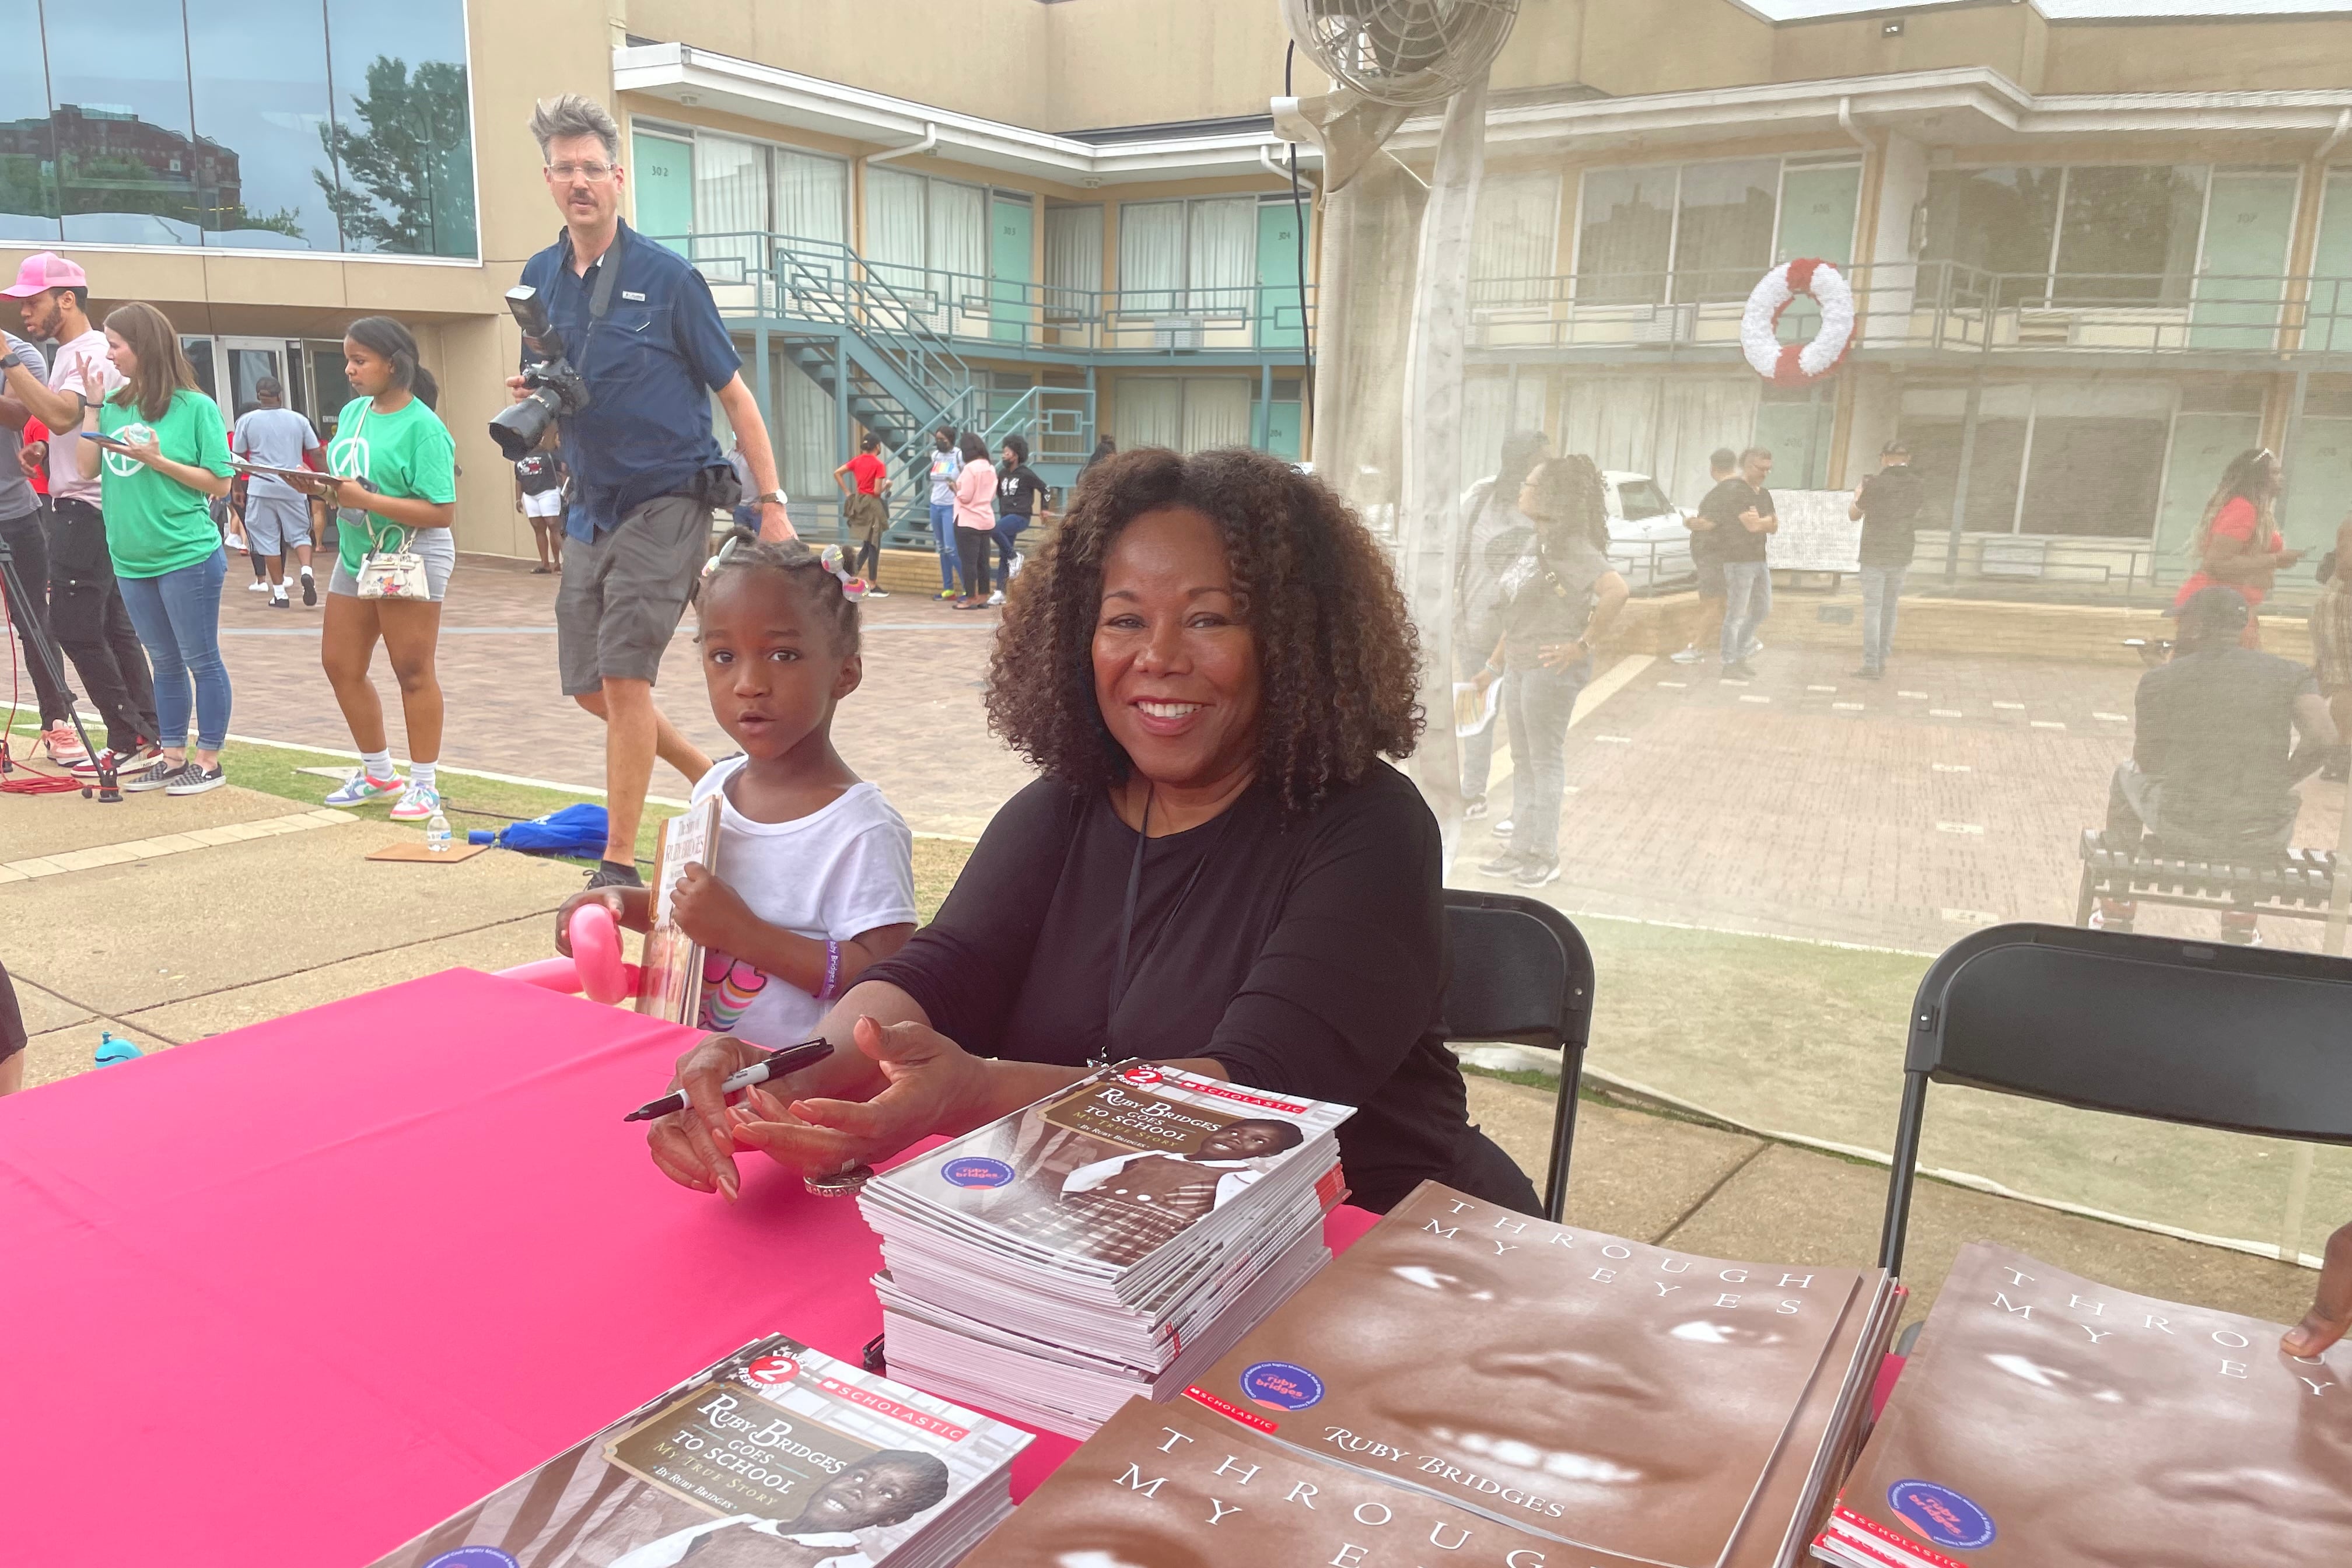 A woman seated at a table with stacks of books featuring an image of a child on the cover. A small child is behind the woman.